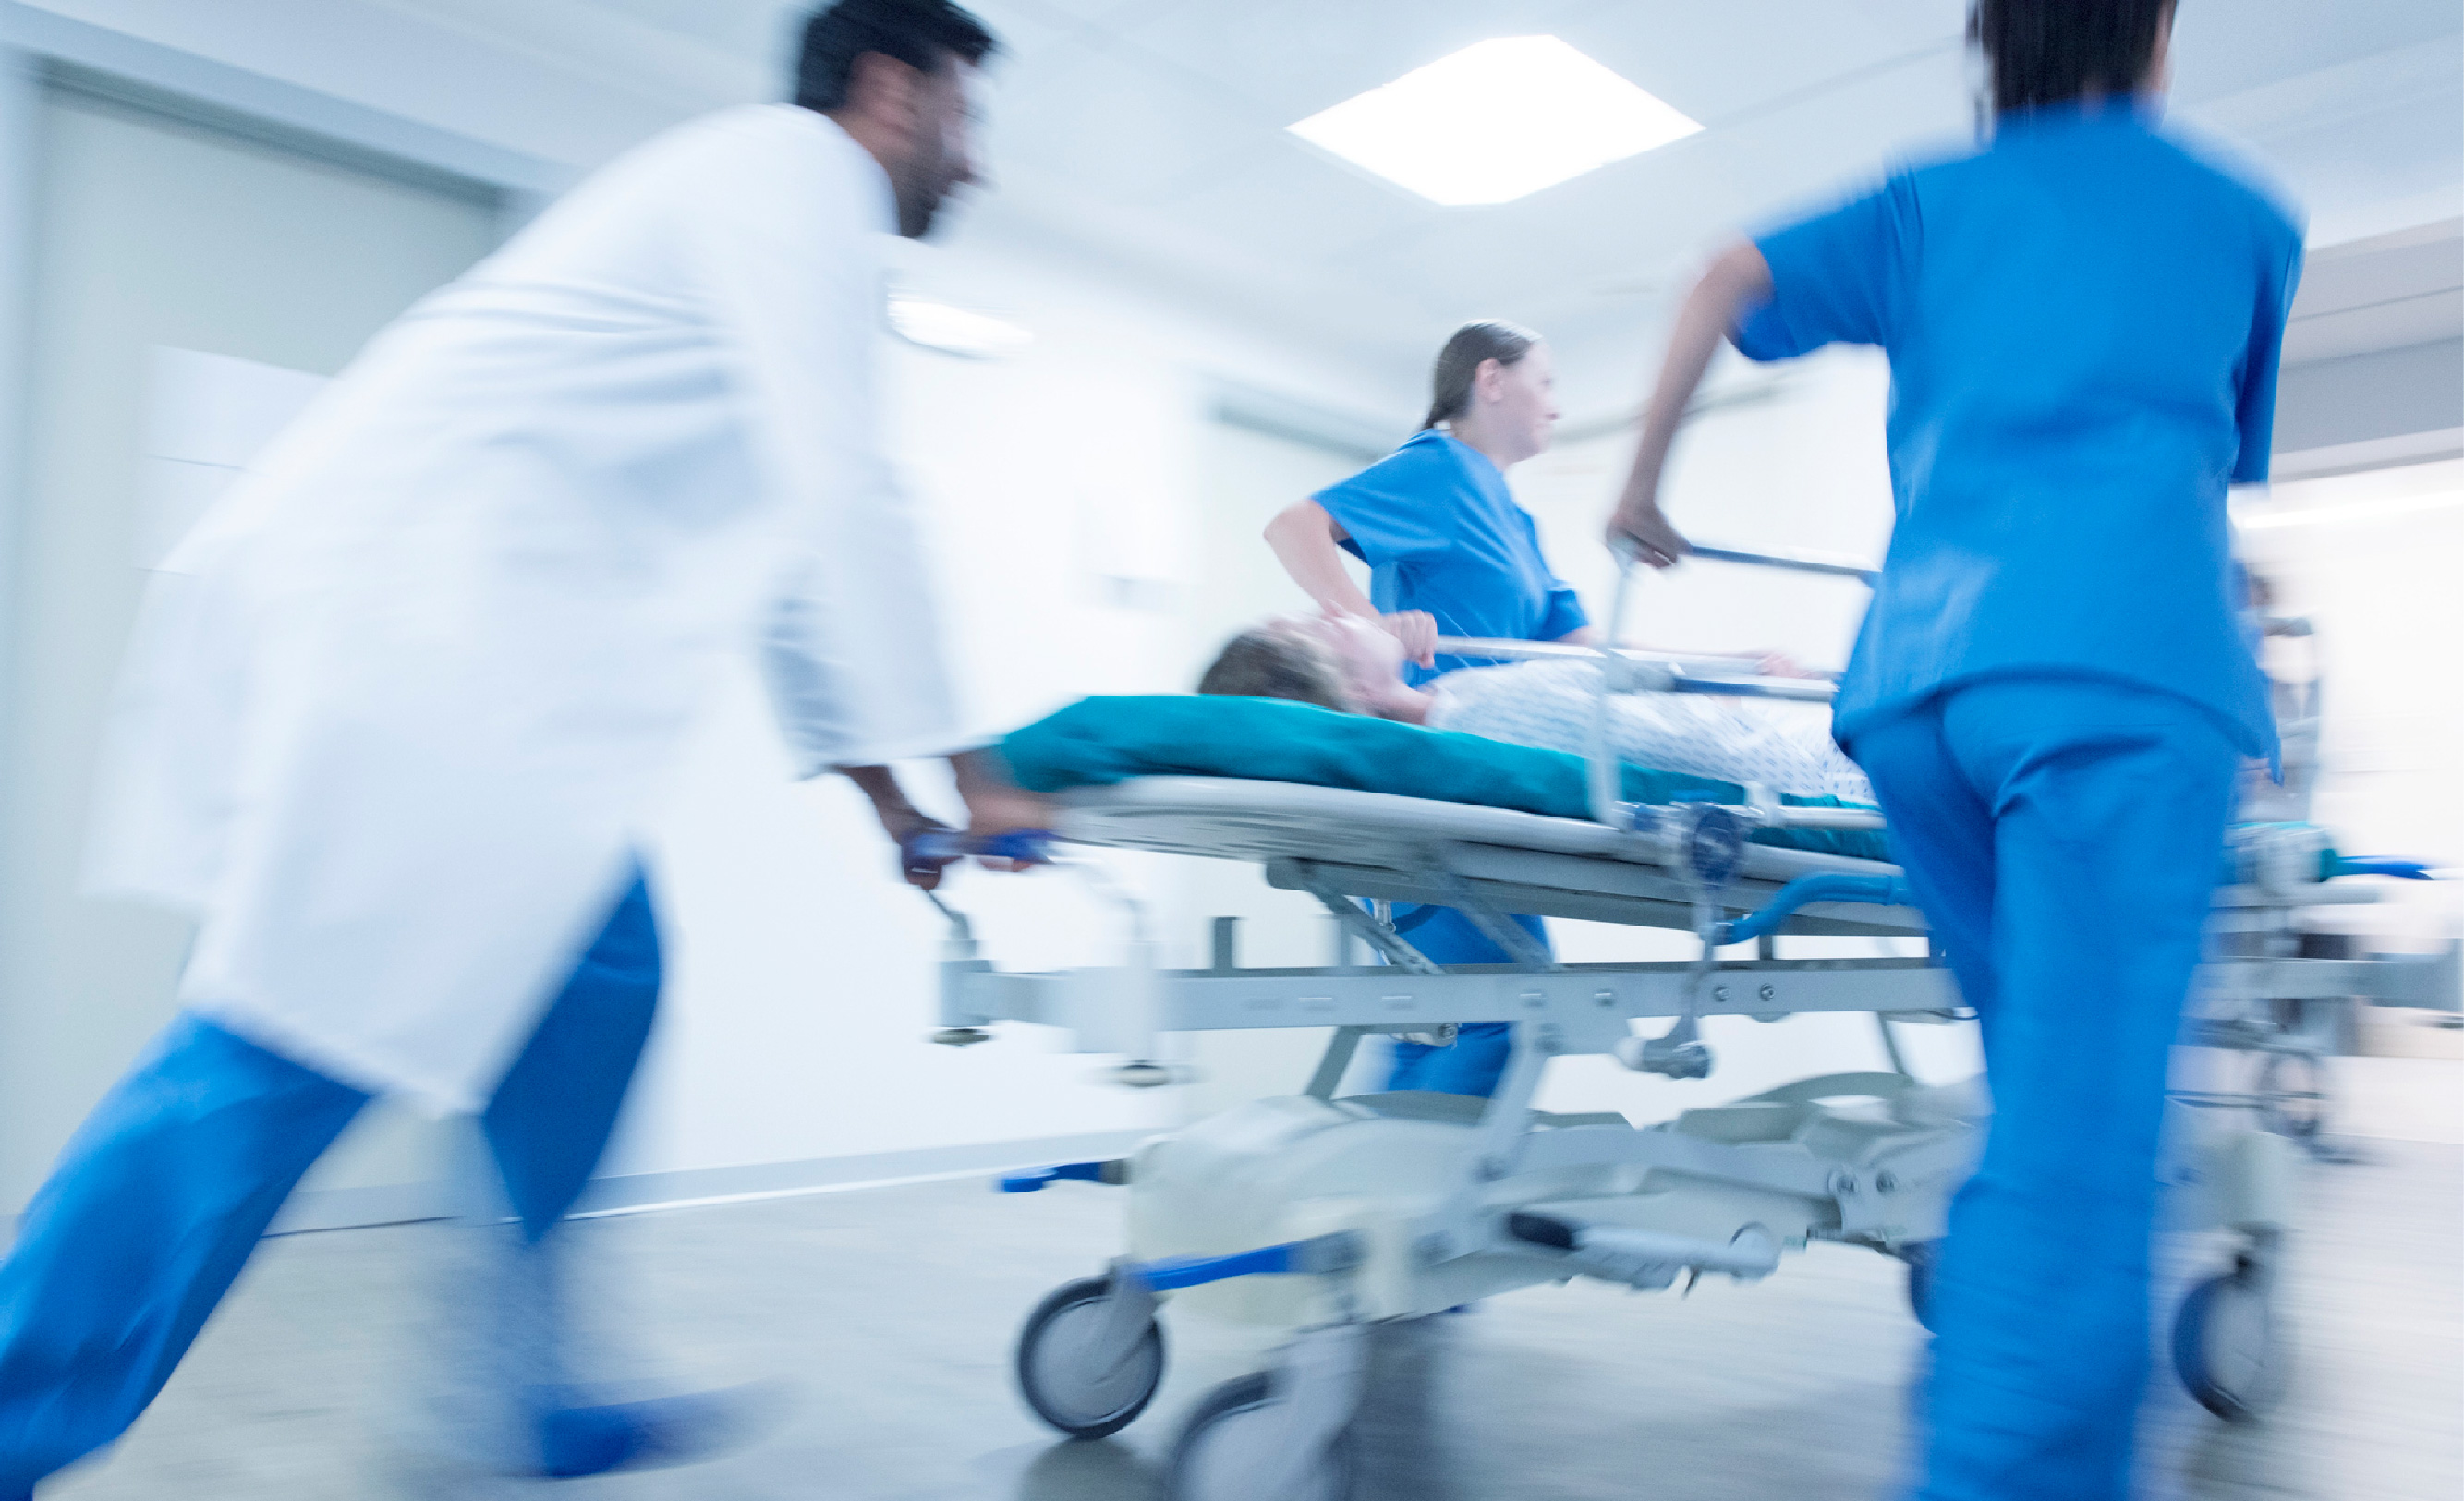 Healthcare workers in scrubs and one in a white coat rush an individual in a hospital gown through a hospital hallway